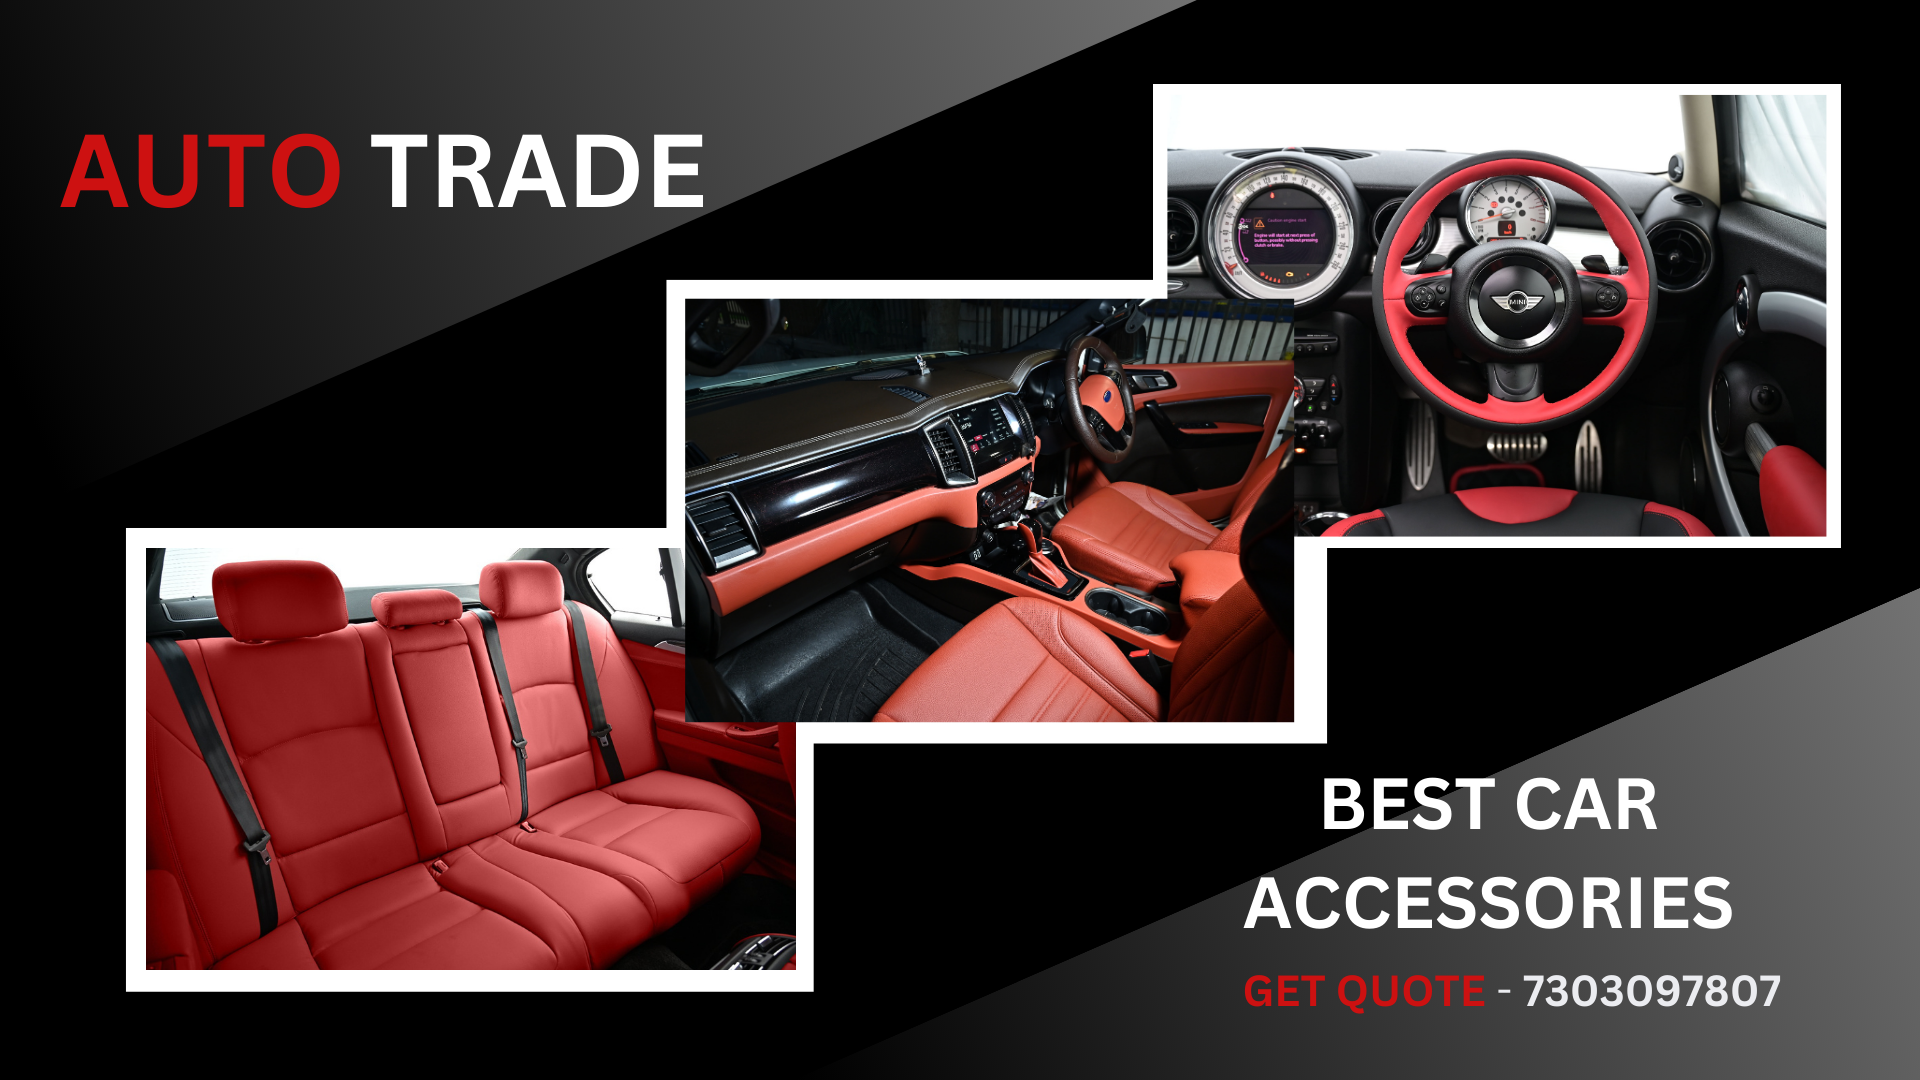 Best Car Accessories Near Me by Auto Trade Interior